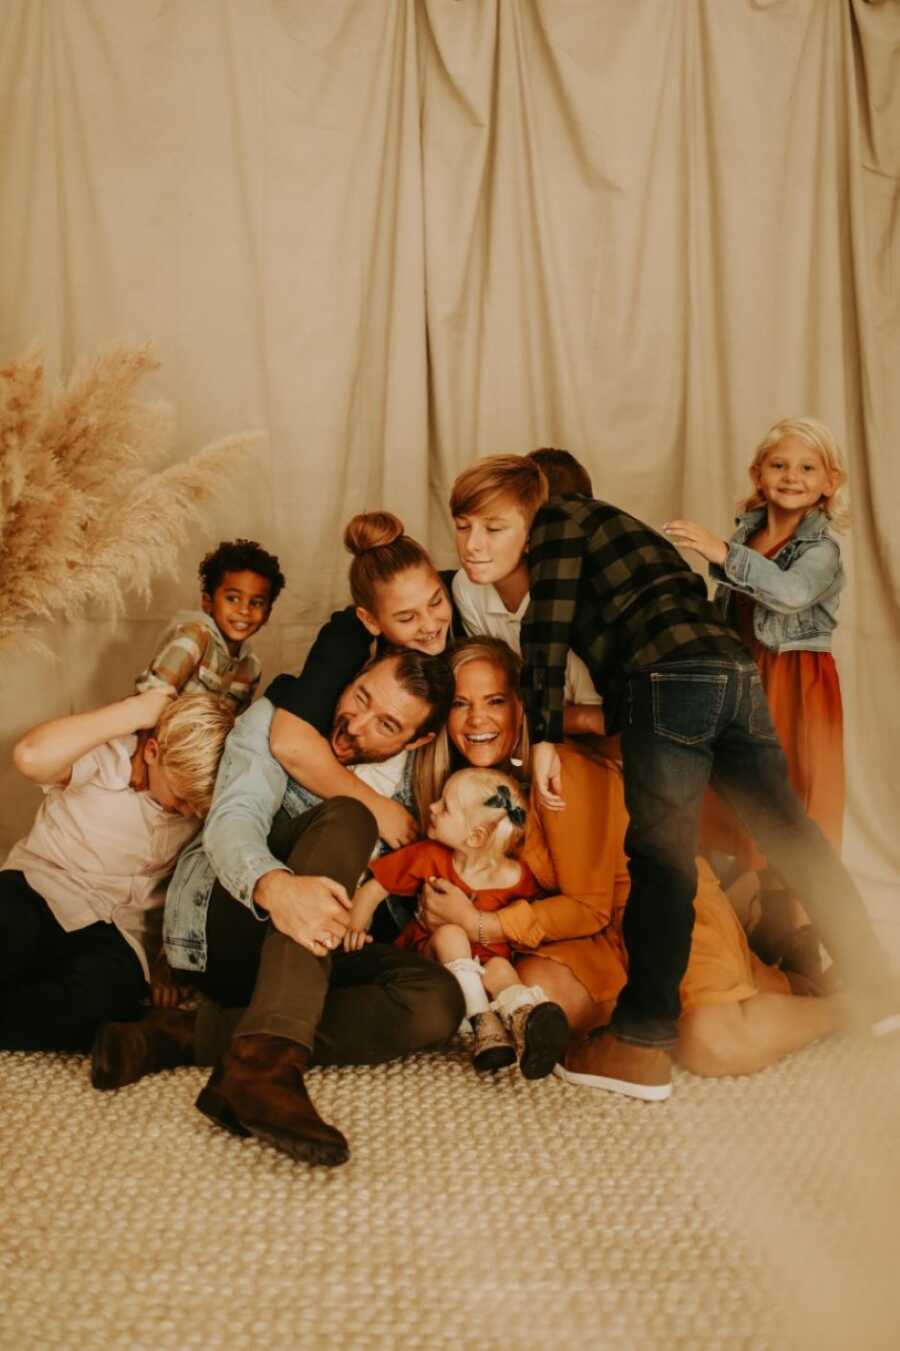 Family of nine take a candid photo together during a family photoshoot